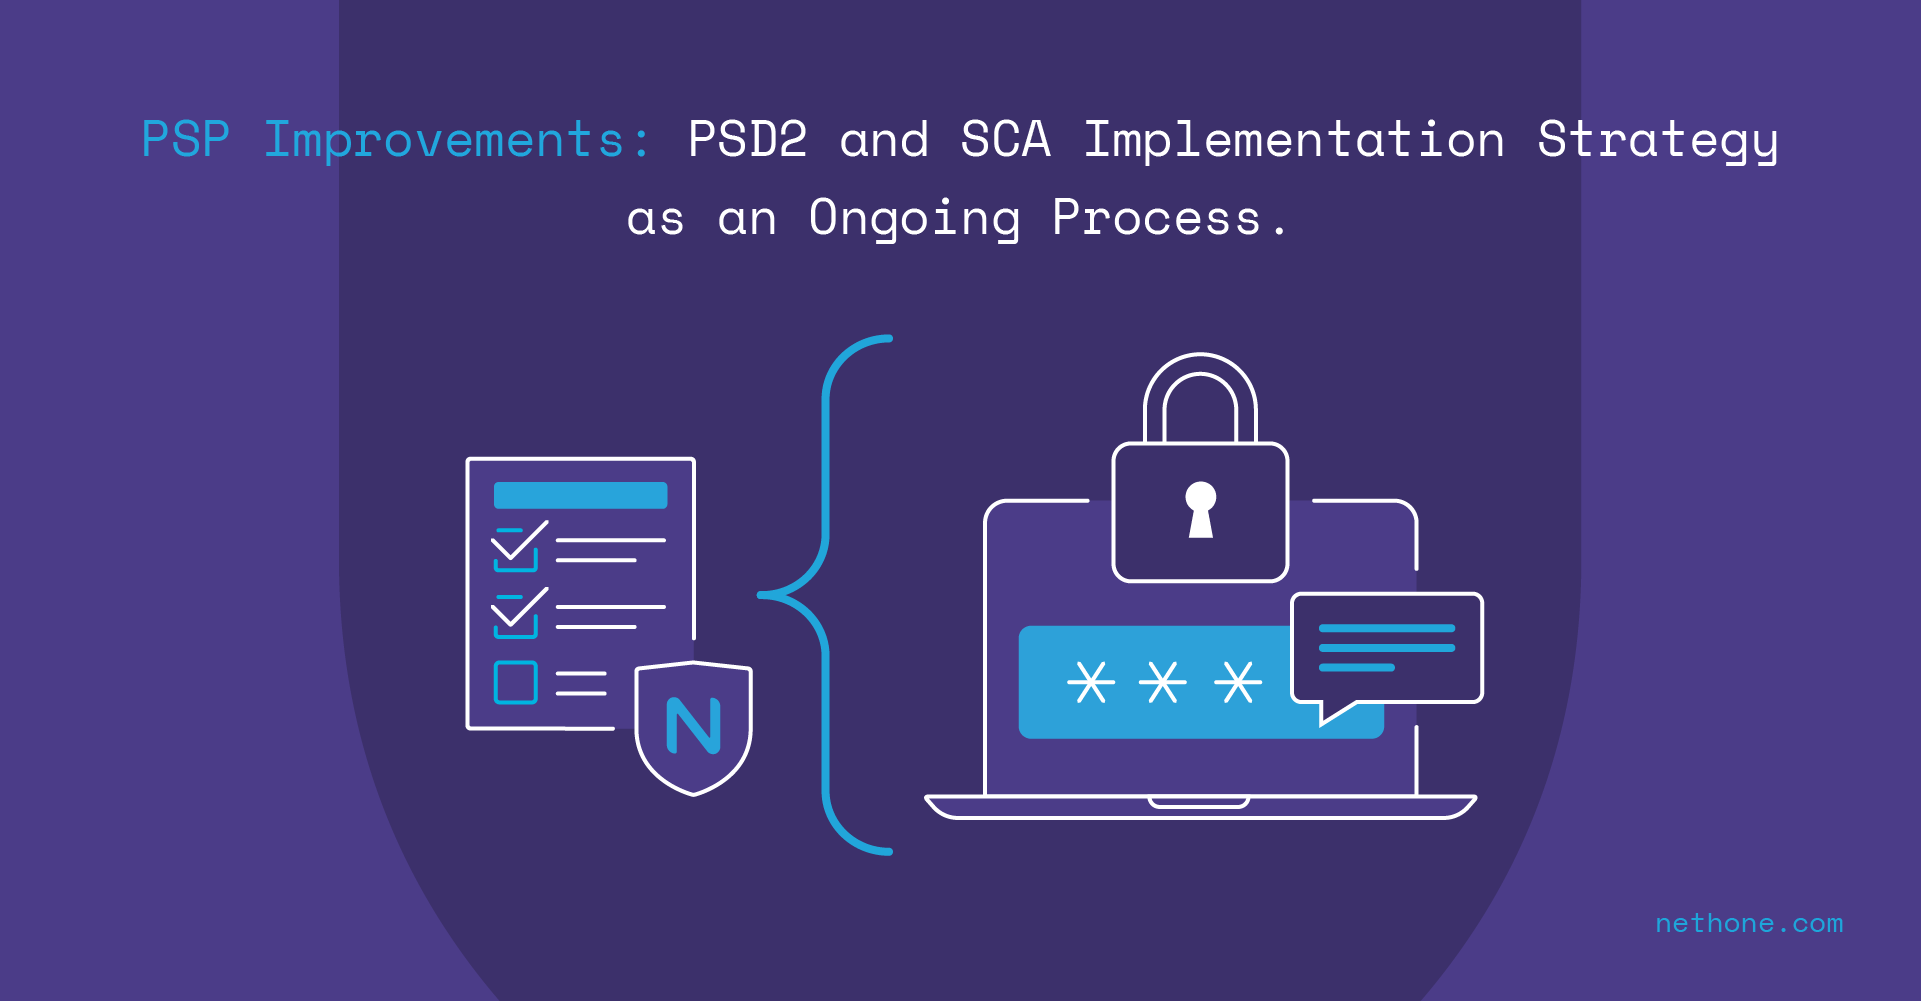 PSP improvements PSD2 and SCA Implementation Strategy